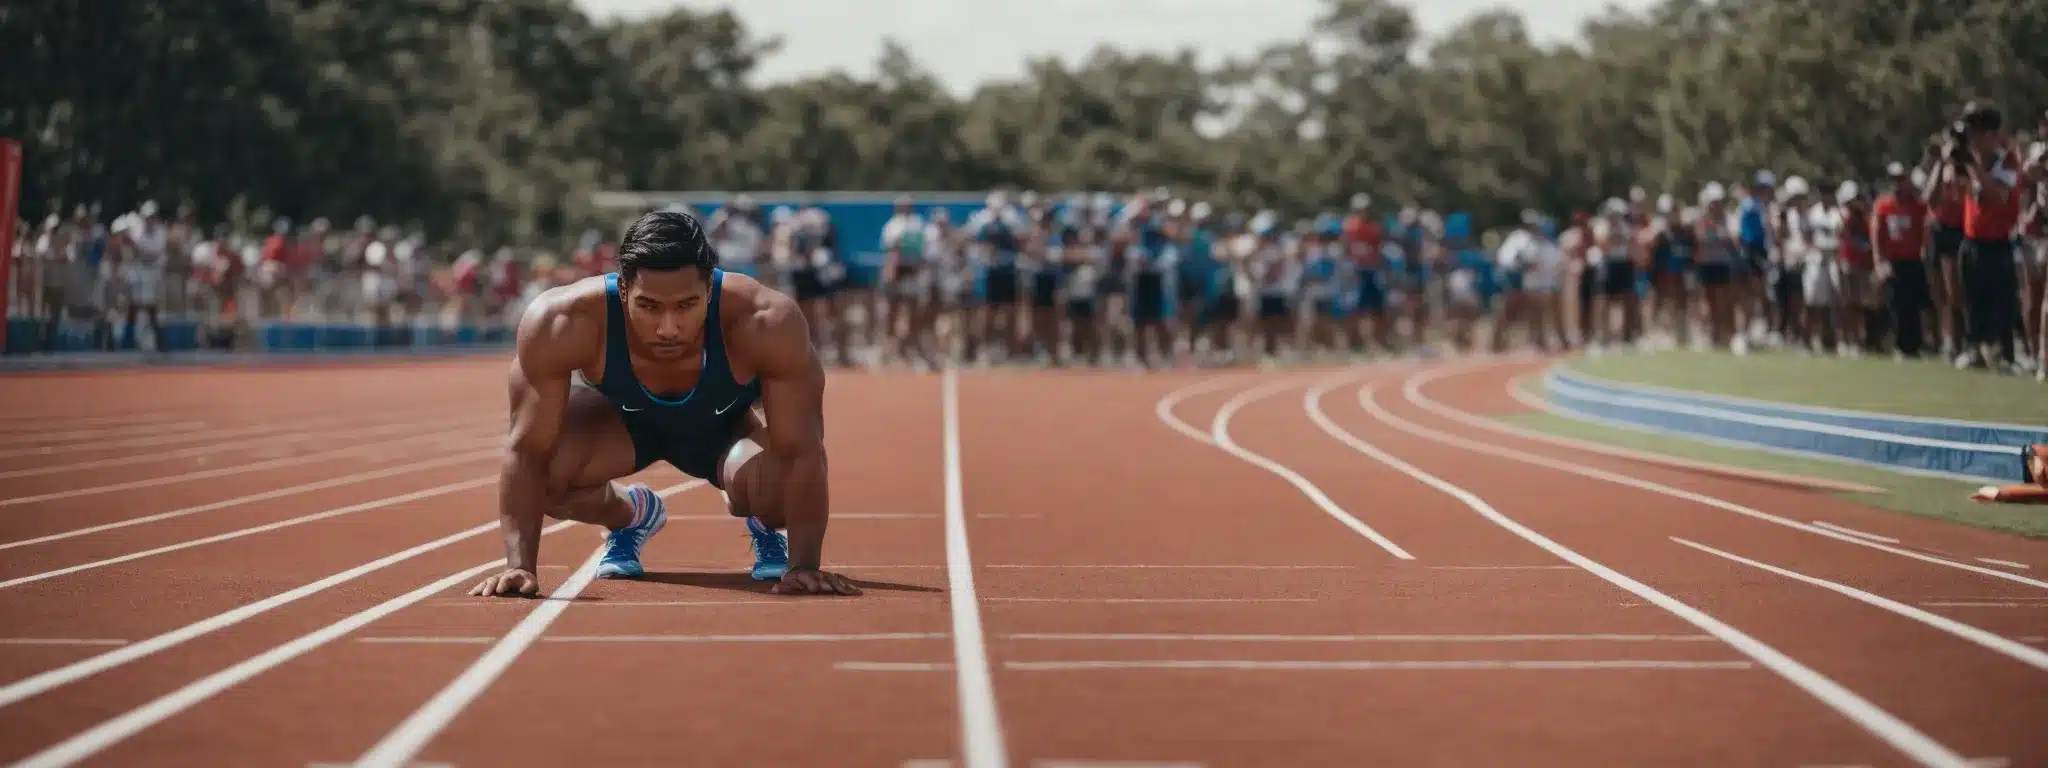 An Eager Athlete Crouched At The Starting Blocks, Eyes Focused On The Track Ahead, Symbolizes A Startup'S Readiness To Race Towards Market Success.